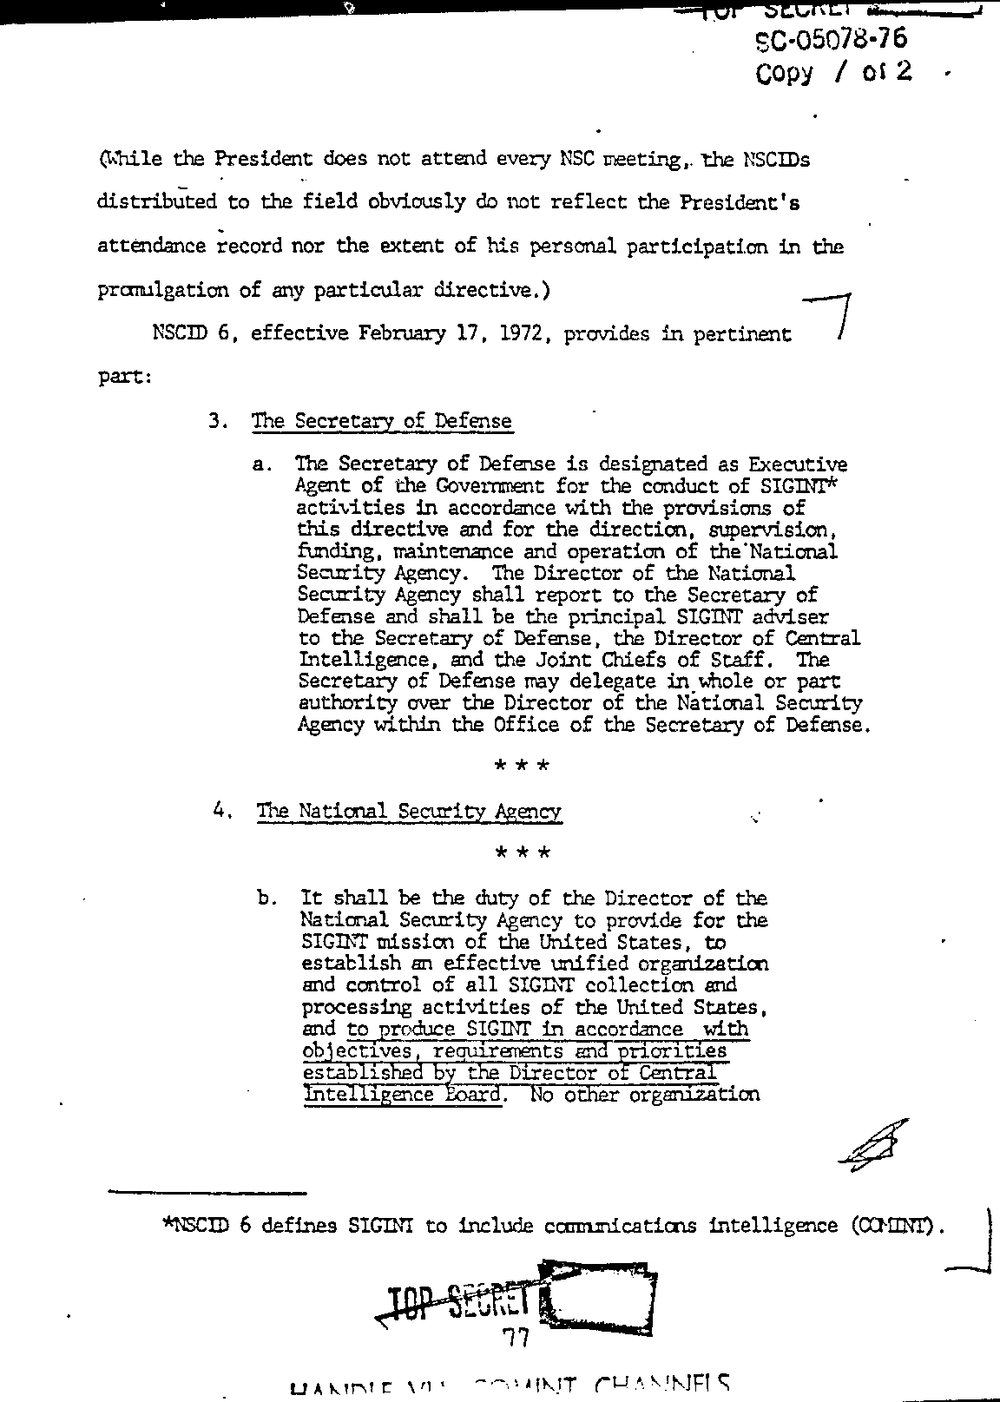 Page 85 from Report on Inquiry Into CIA Related Electronic Surveillance Activities